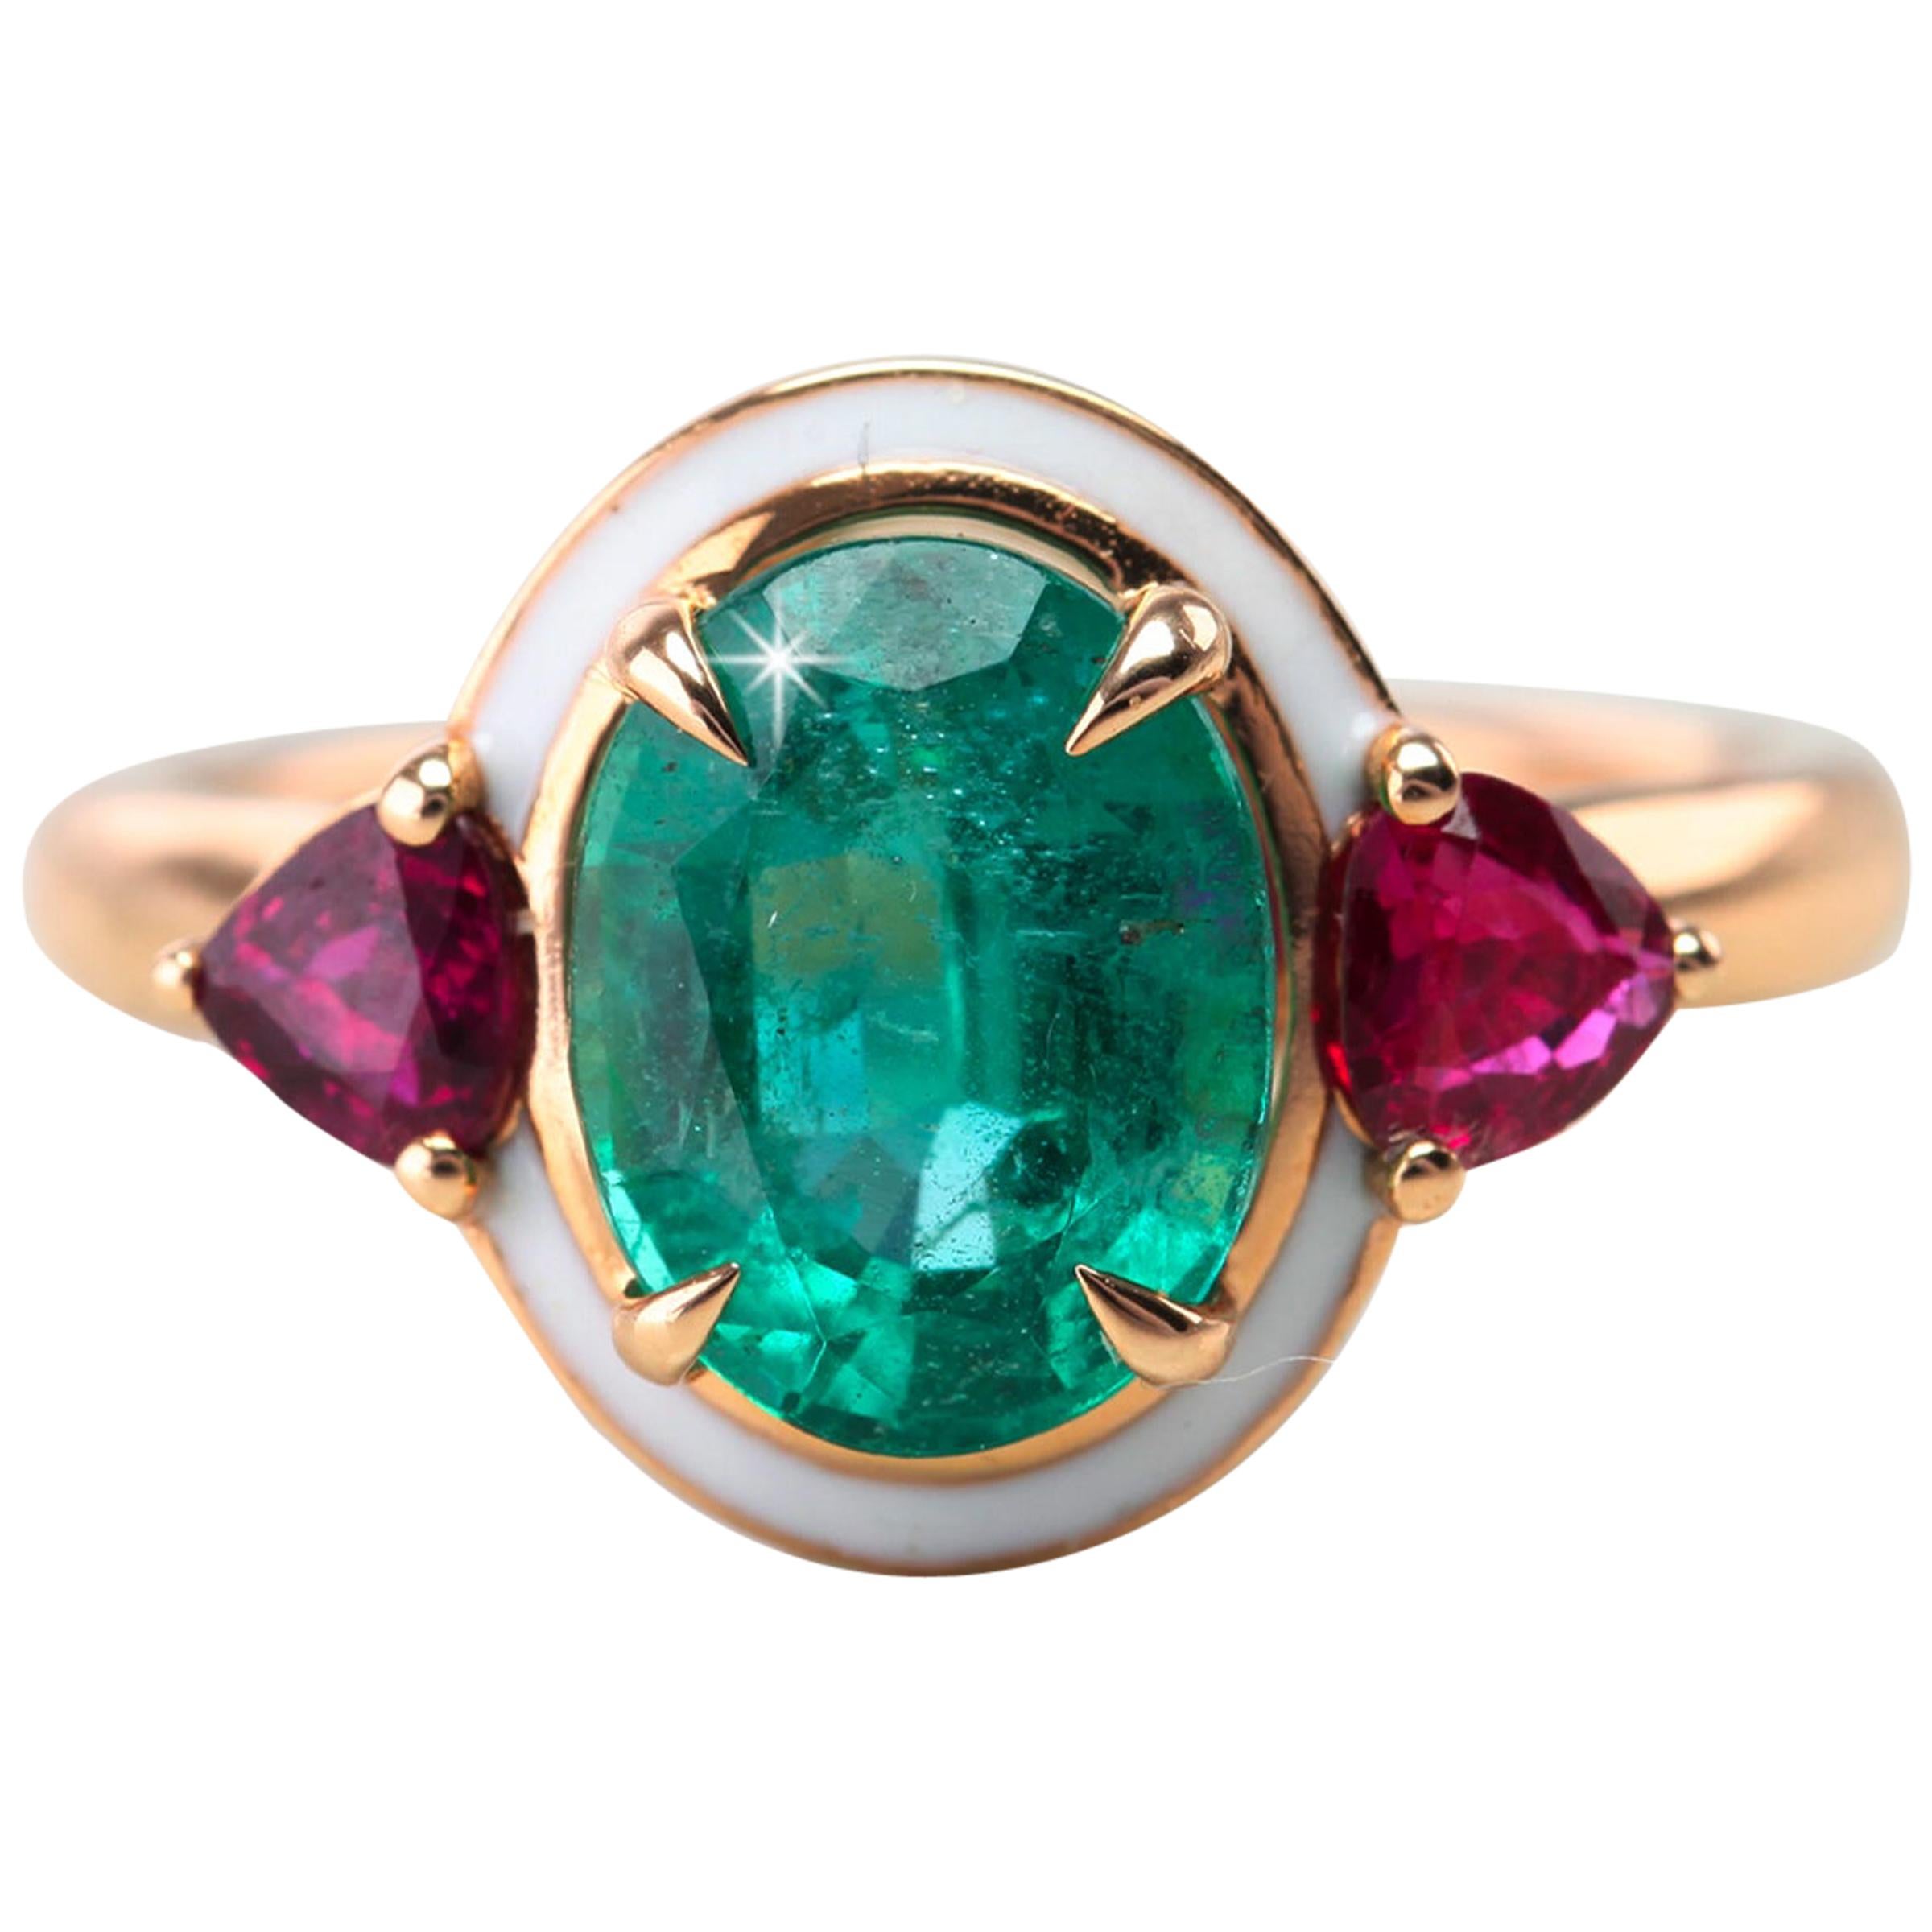 Artdeco Style Oval Emerald and Ruby with White Enameled Statement Ring